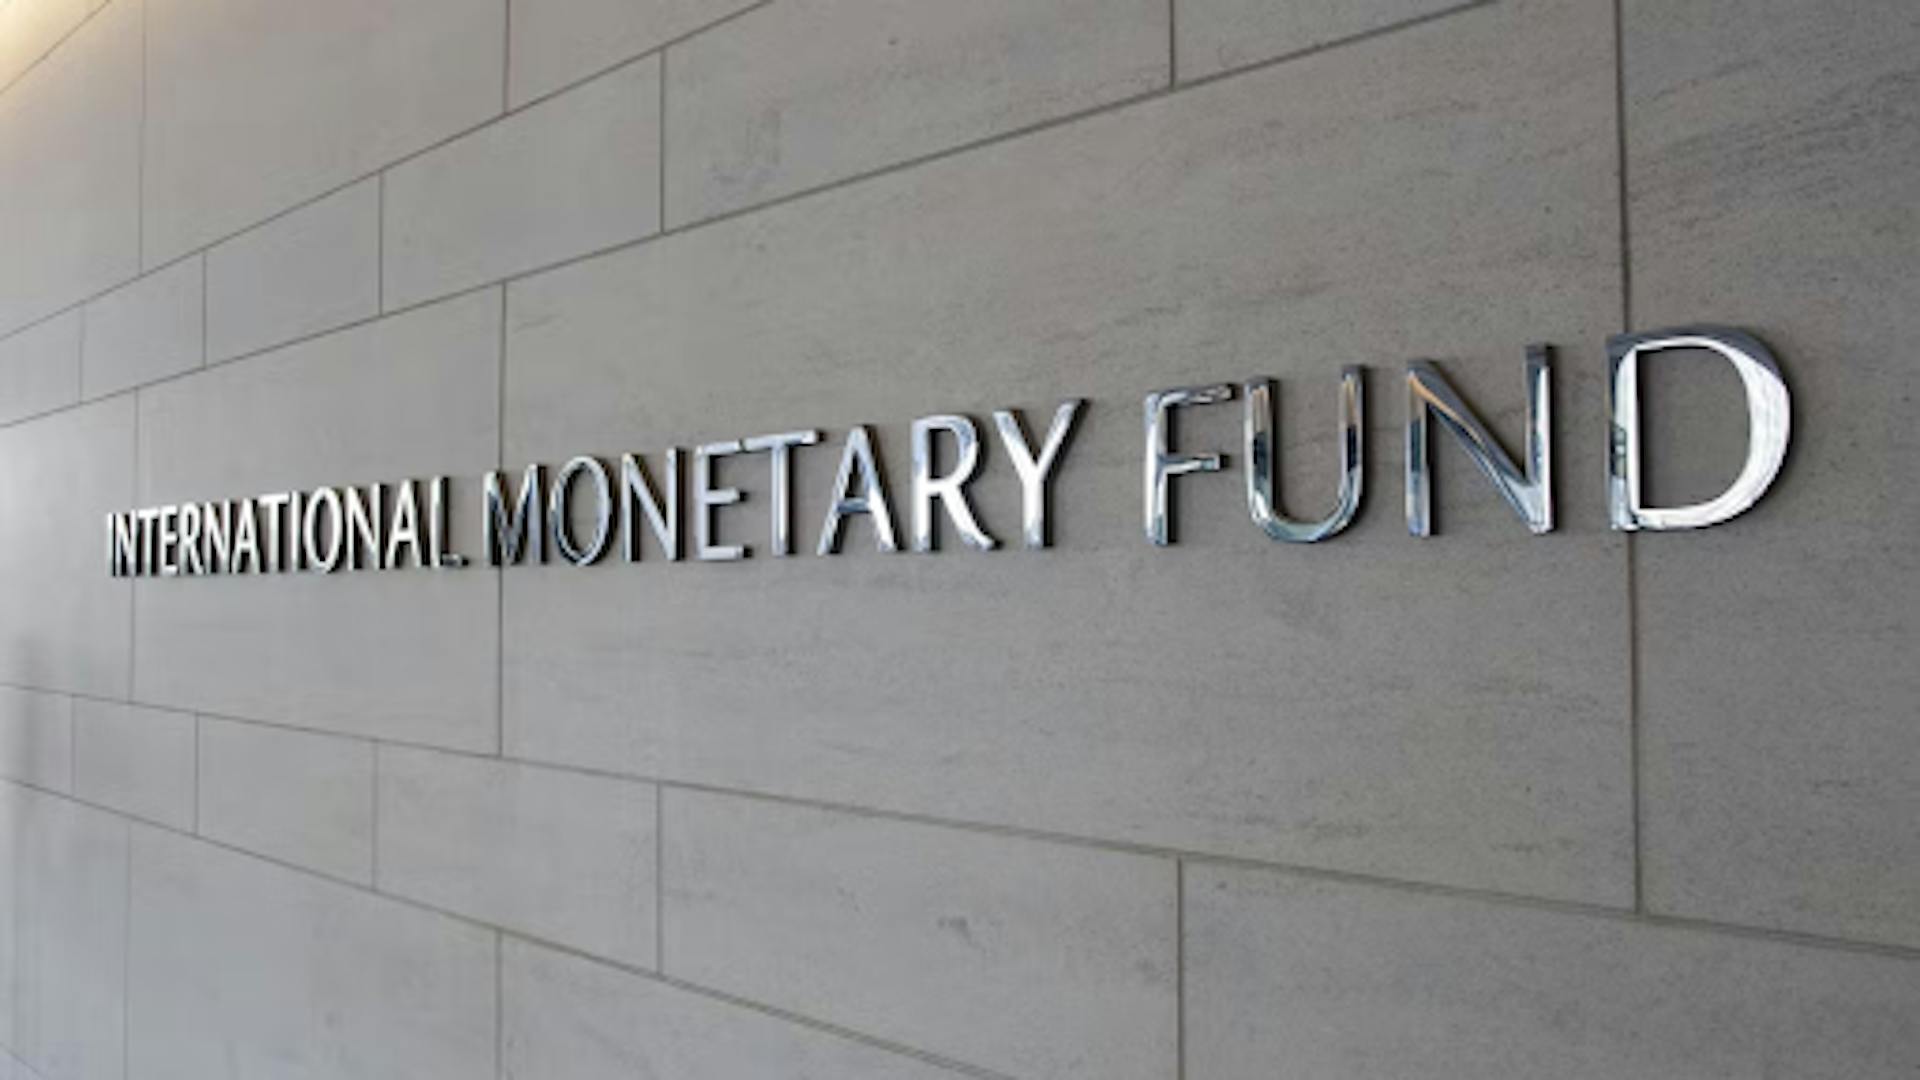 Bank Information Center: Why should the IMF eliminate surcharges?